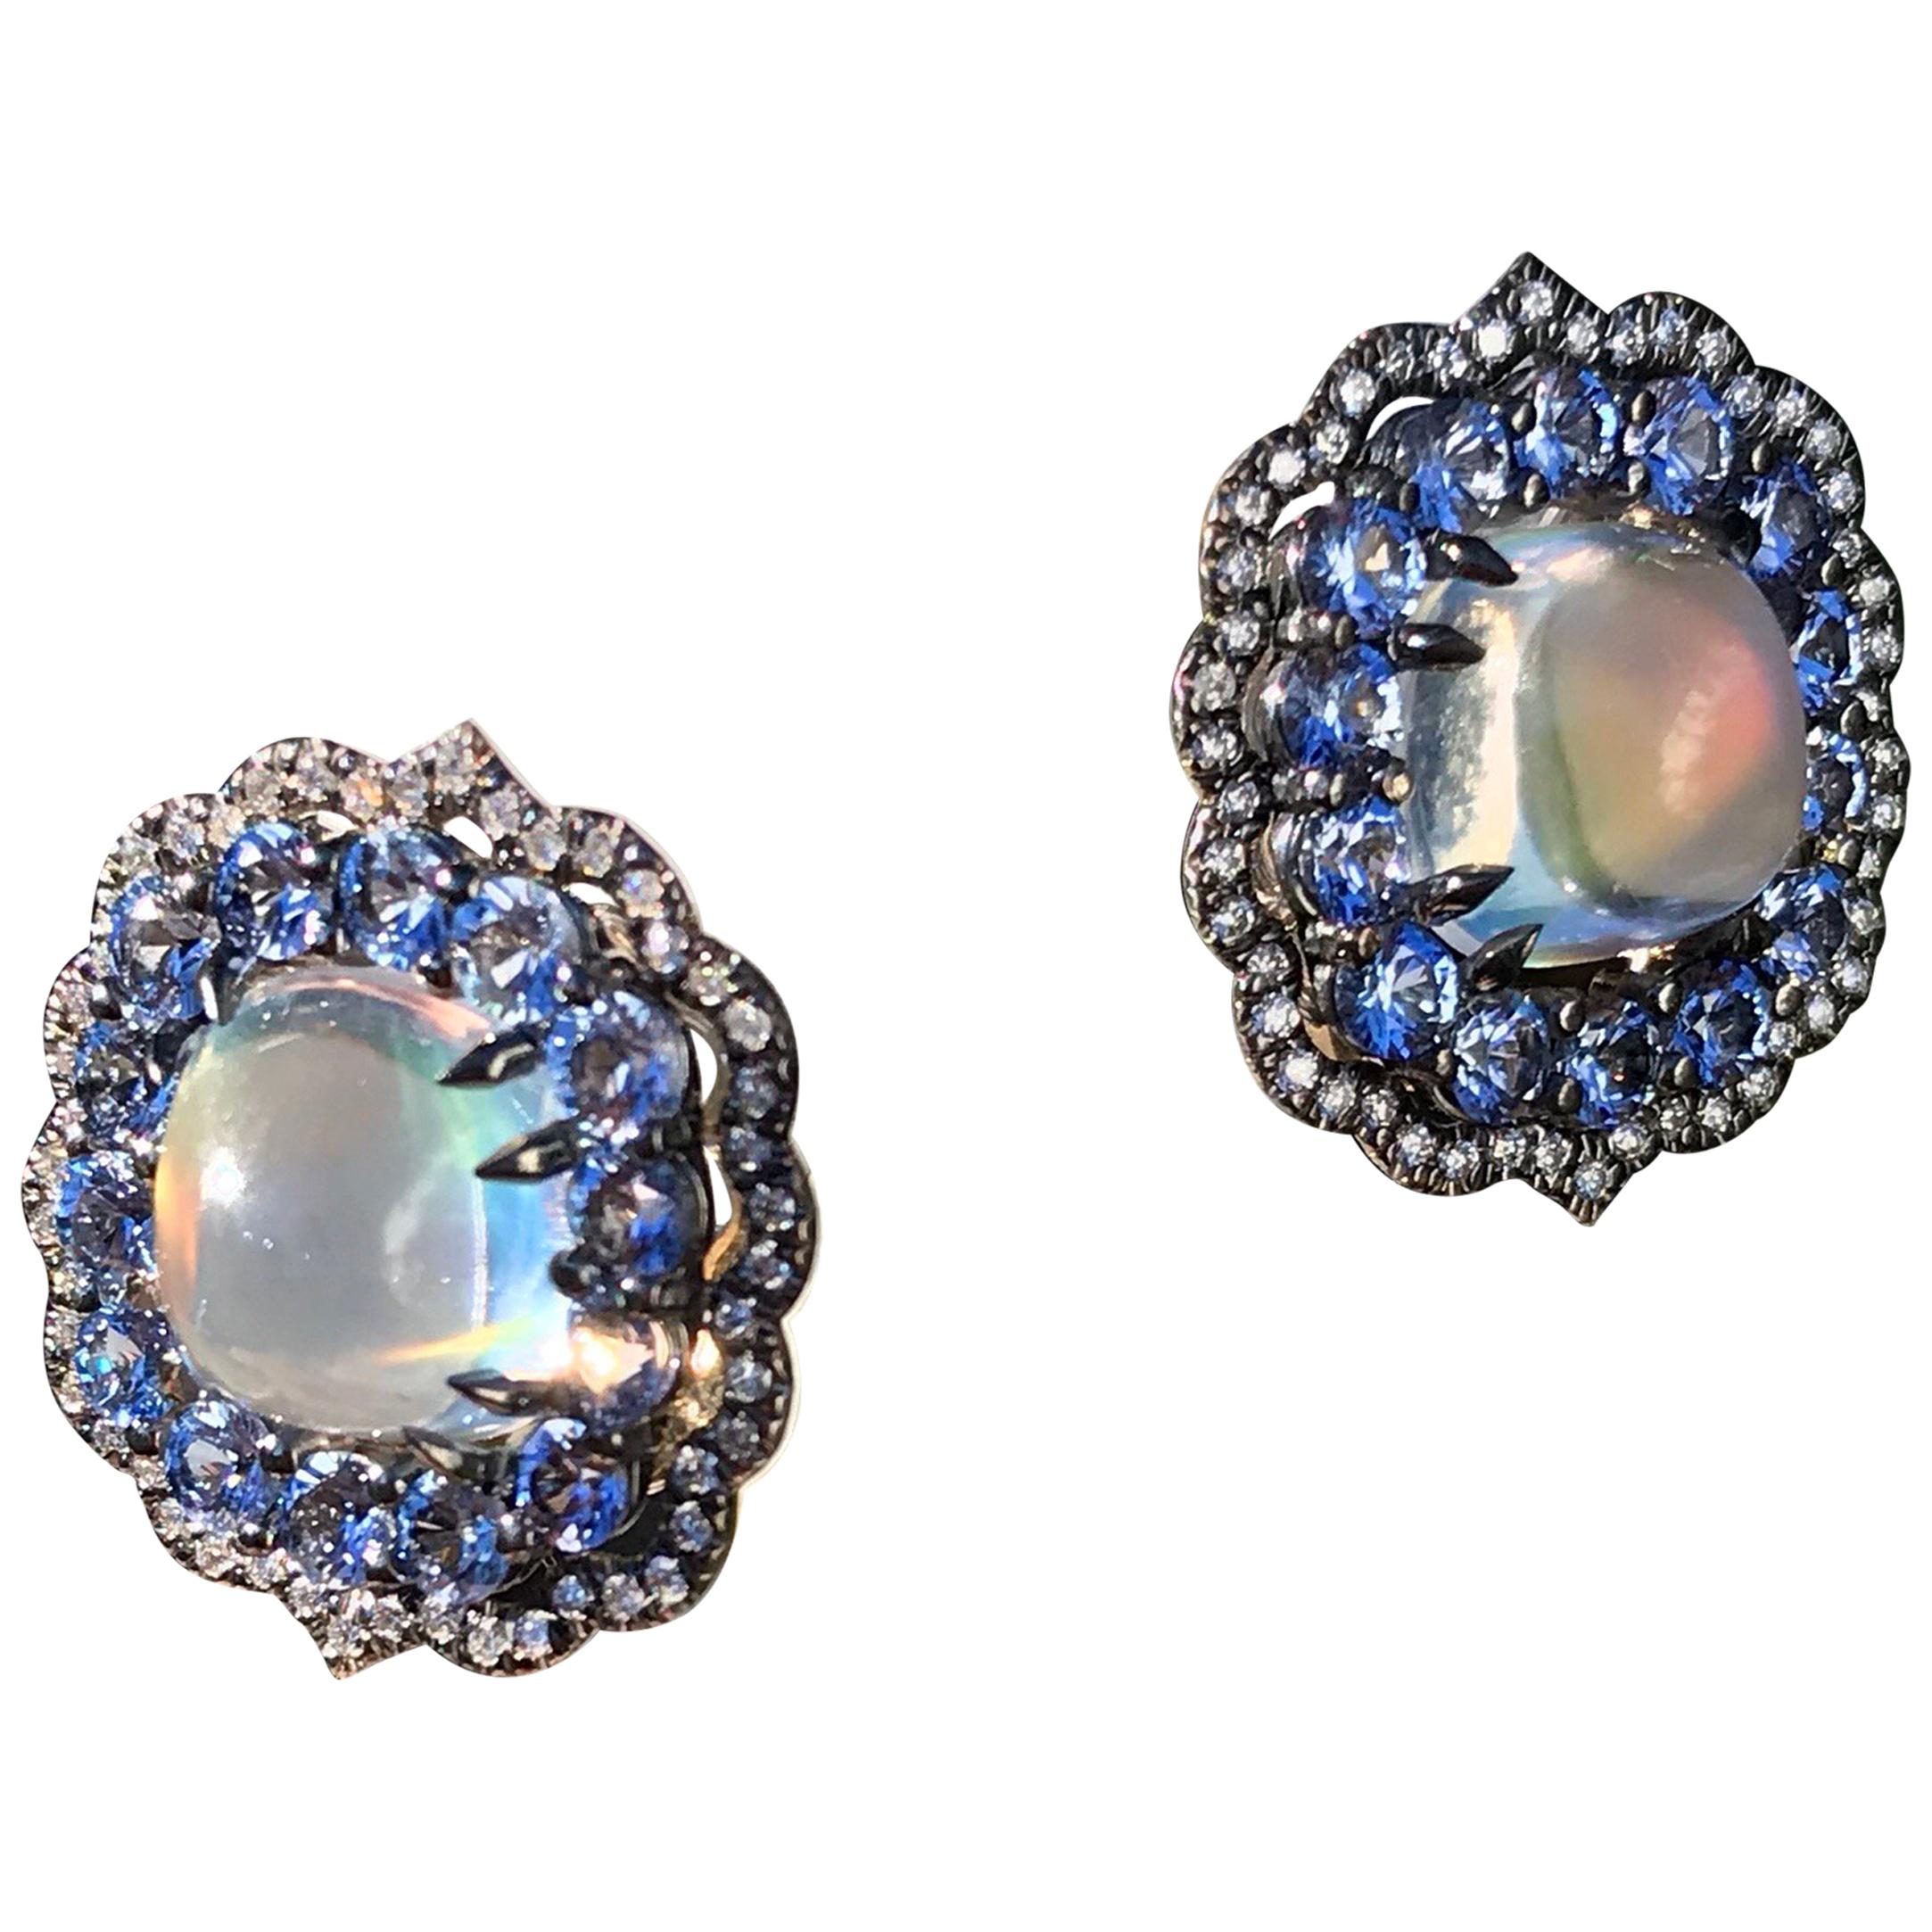 Rainbow Moonstone Earrings with Blue Sapphire and Diamond Accent